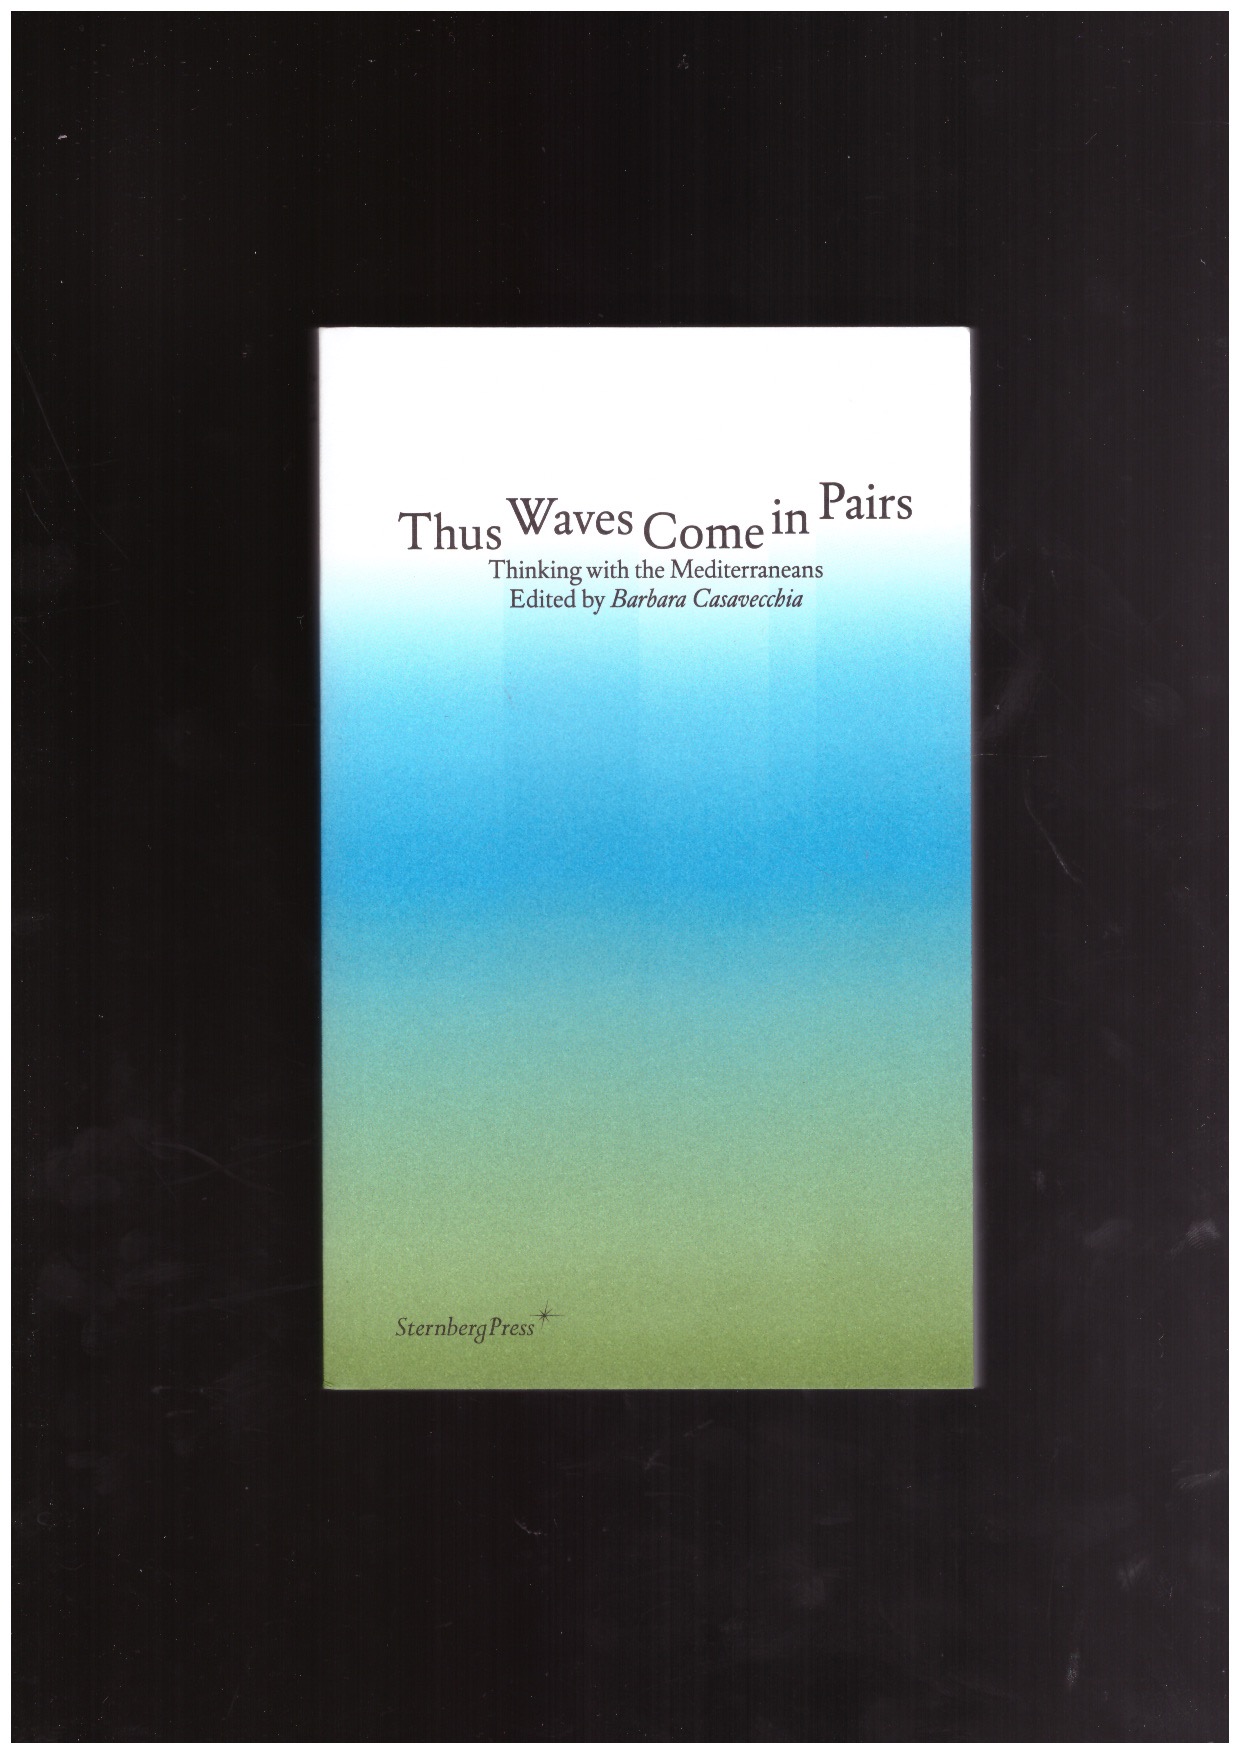 CASAVECCHIA, Barbara (ed.) - Thus Waves Come in Pairs – Thinking with the Mediterraneans